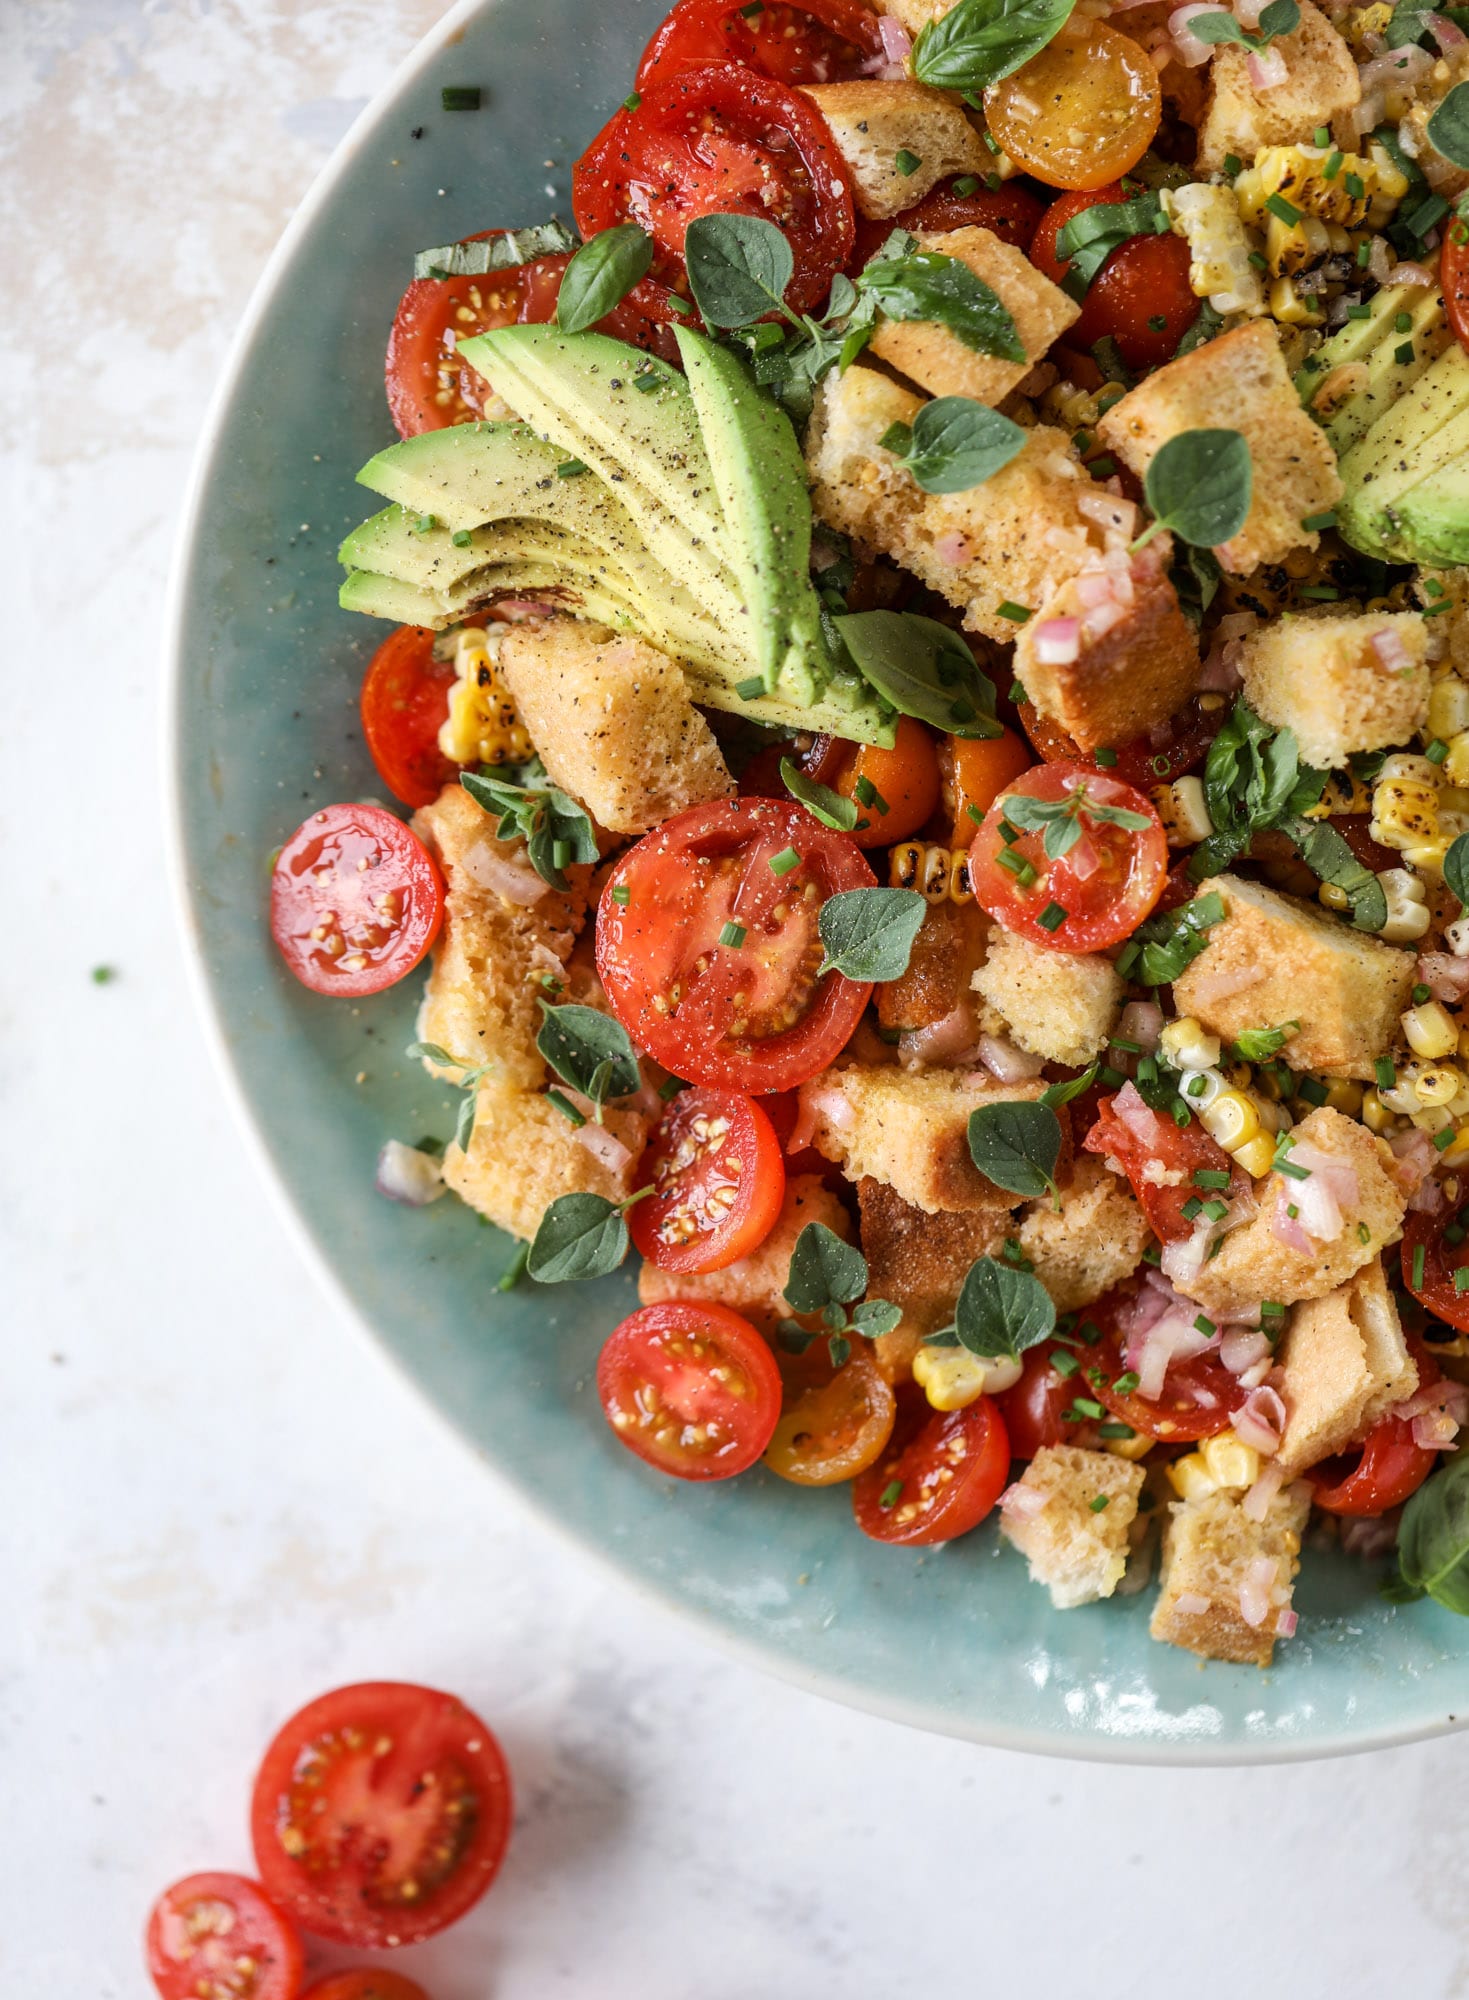 This is the perfect tomato panzanella salad! It's full of juicy, bursting, sweet tomatoes, toasted sourdough bread cubes, fresh herbs, grilled corn, sliced avocado and an incredible homemade dressing that blankets everything in deliciousness. SO good. I howsweeteats.com #panzanella #salad #tomato #basil #summer #corn #avocado #healthy #recipes